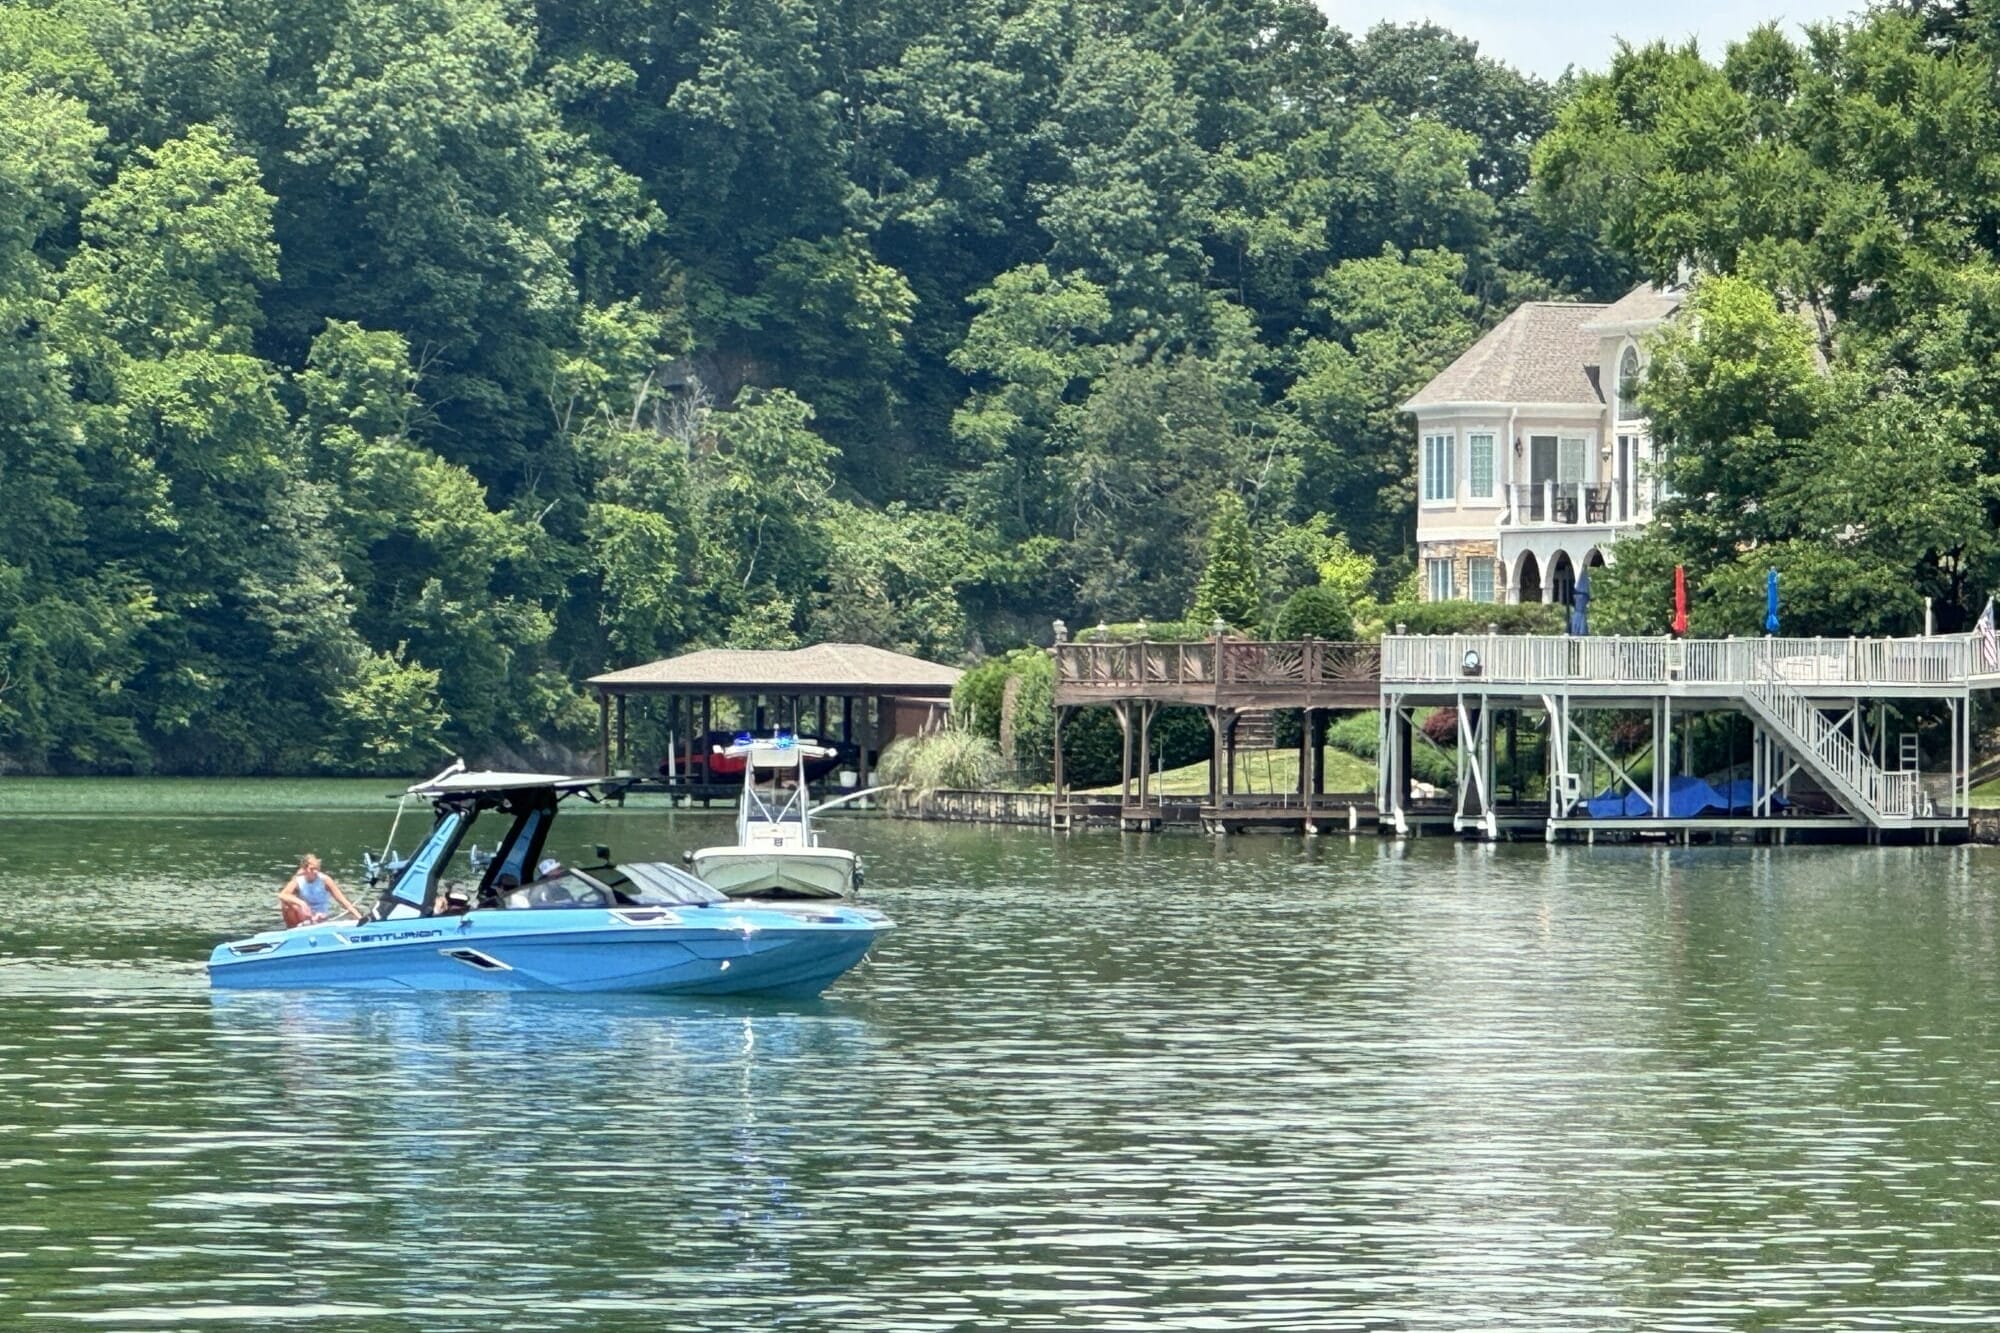 A blue motorboat with several people onboard cruises on a lake near a large lakeside house with a dock and surrounding greenery.